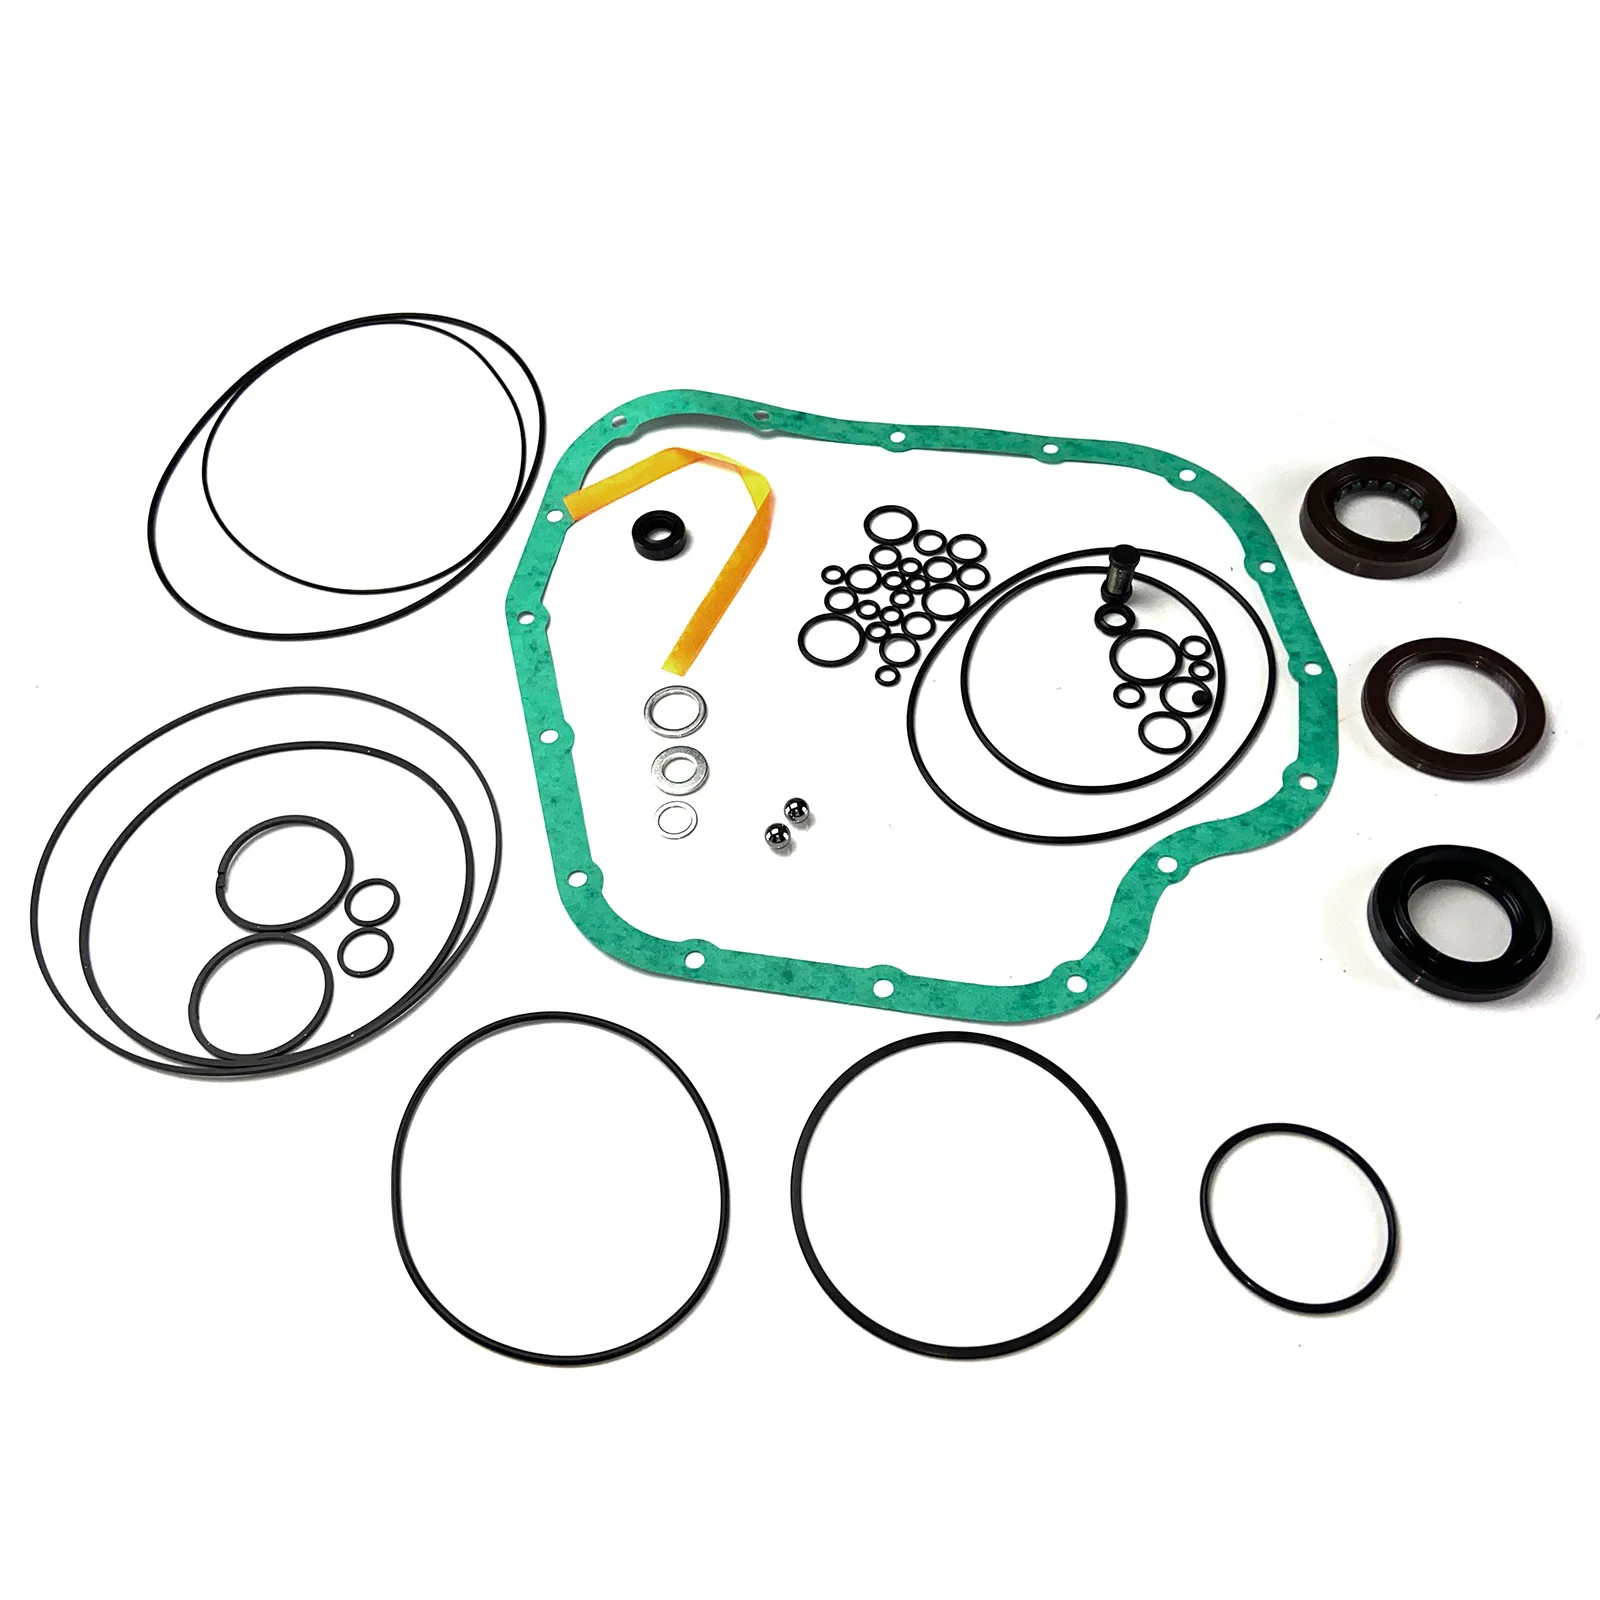 ATX Transpeed K313 Other Auto Transmission Systems gear boxes overhaul kit T07602A(图6)